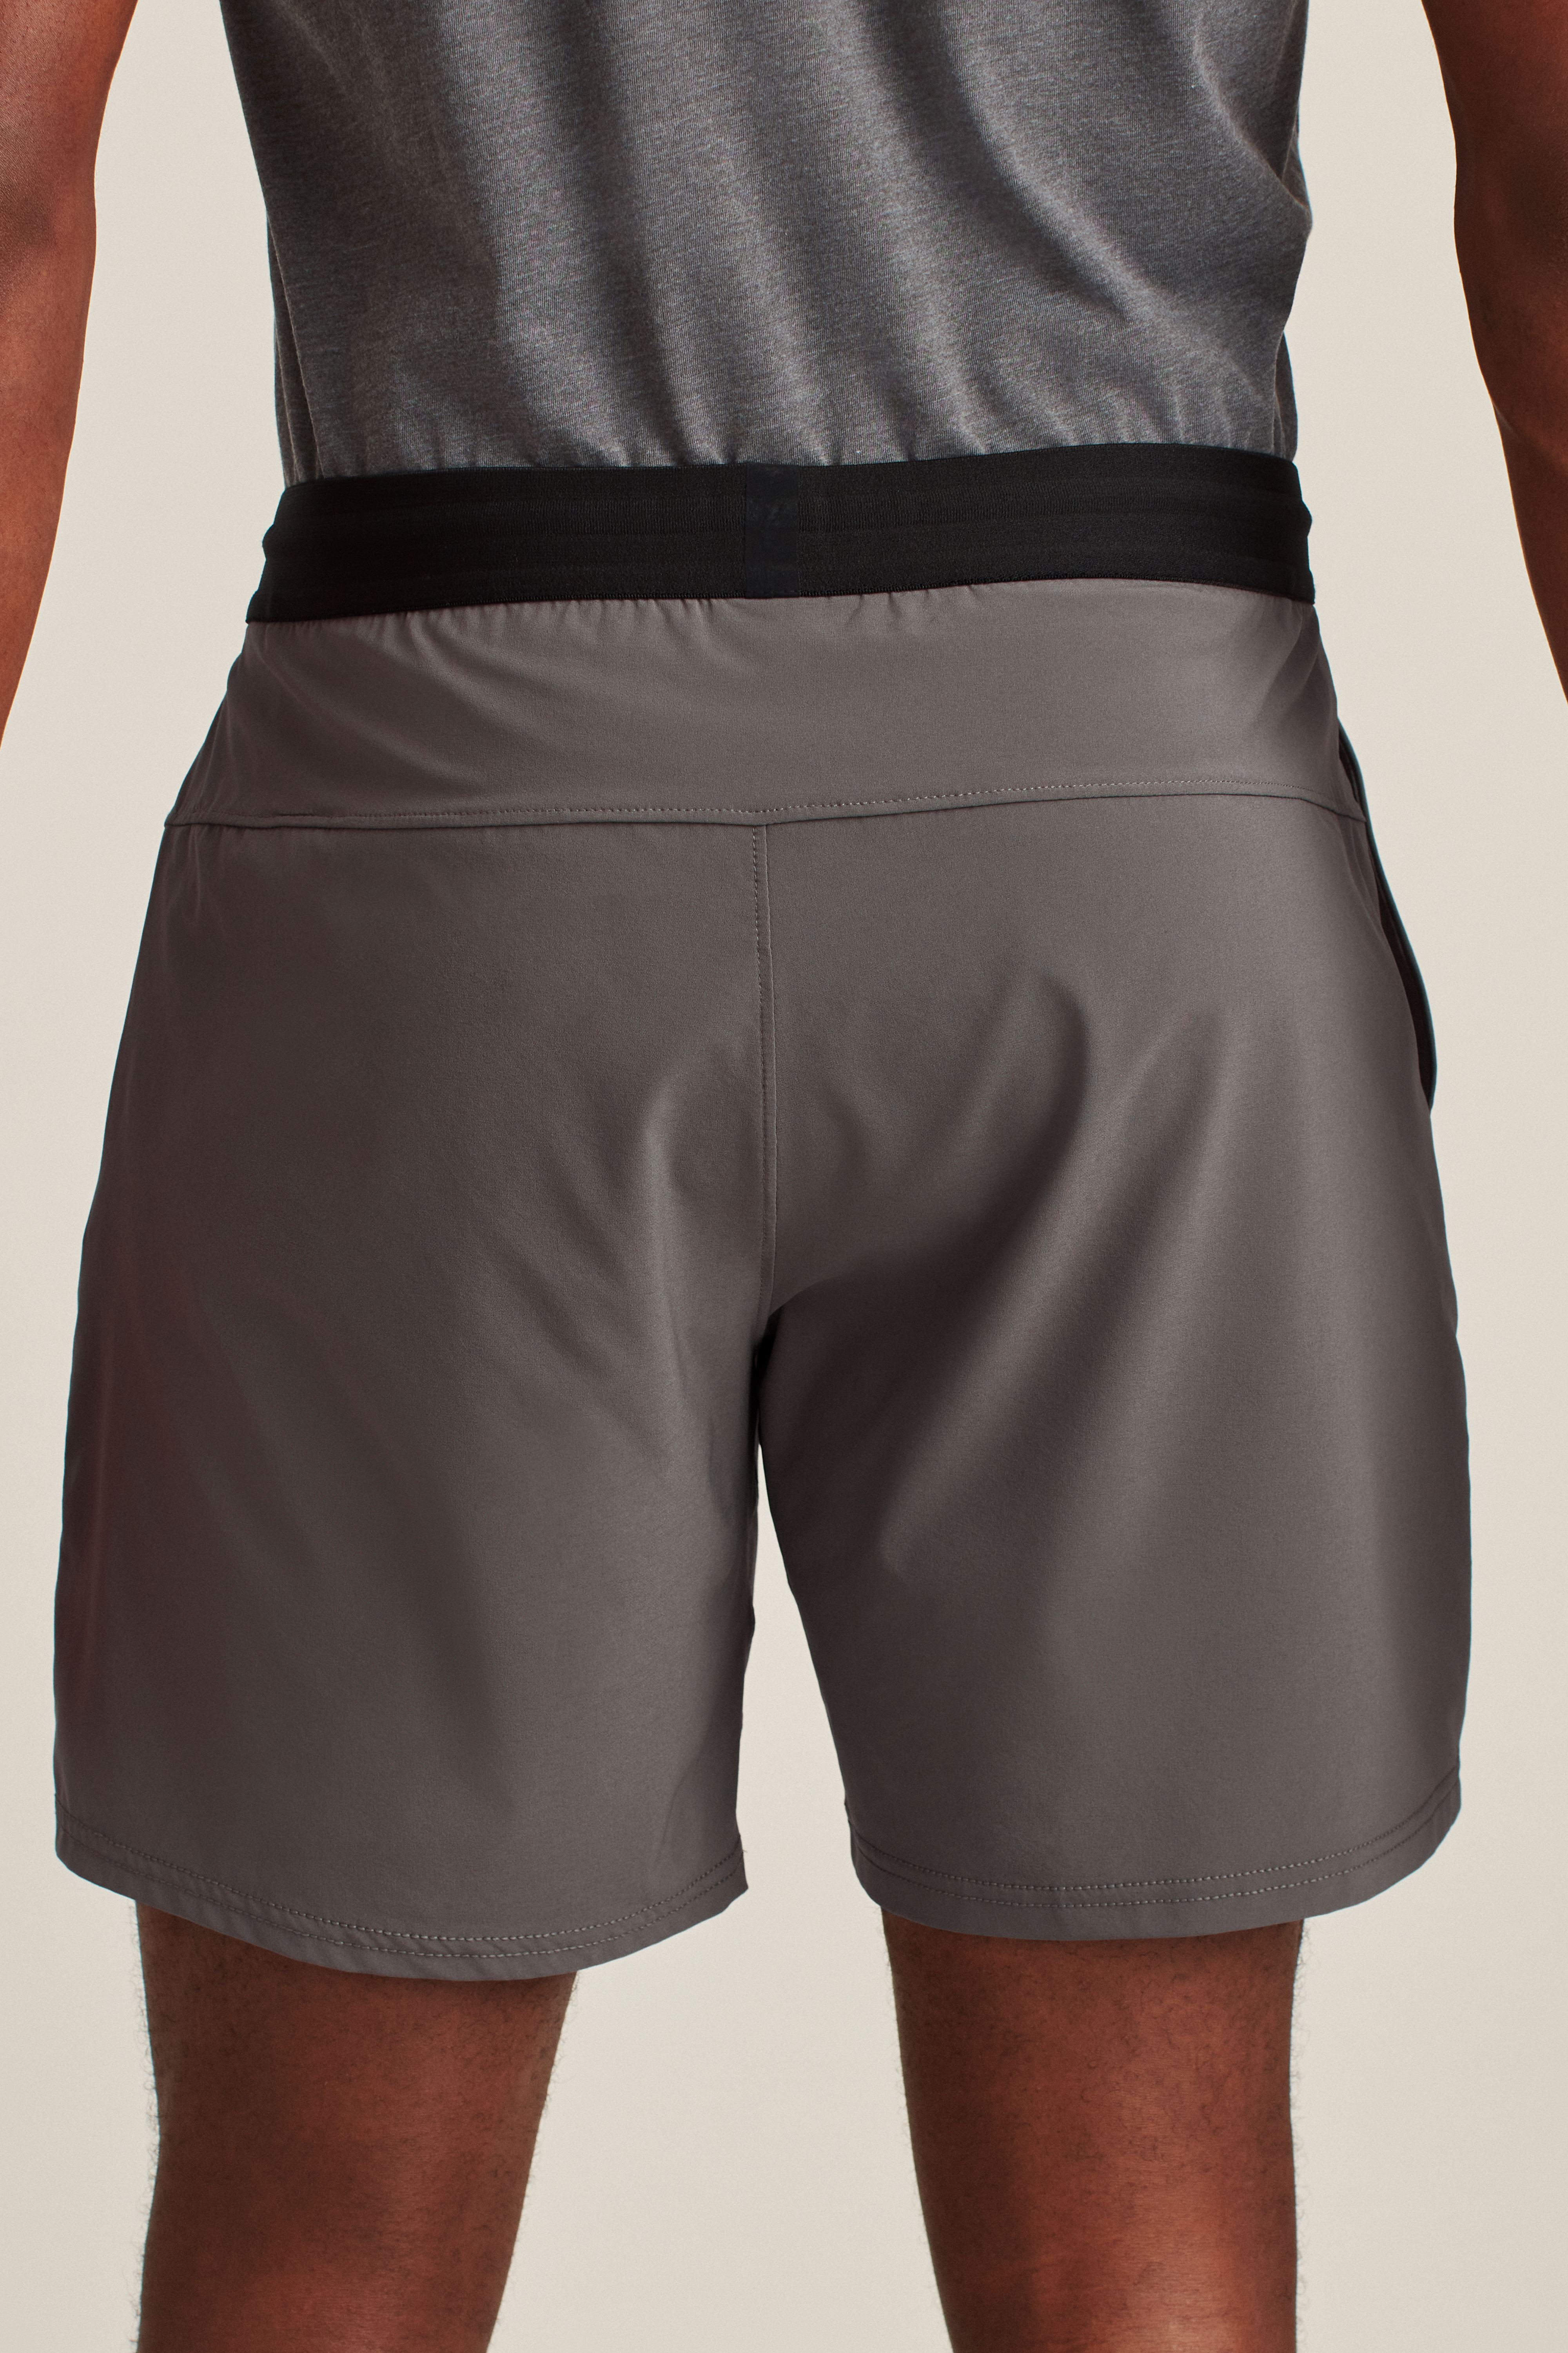 Buy Buttons & Bows Sporty Quick Dry Men Shorts/Knickers Laser Cut Design  with 02 Zip Pocket,Sports Shorts,Running Shorts,Shorts for Men,Shorts for  Boys,Gym Shorts-02 Piece,Grey-Black Online at Best Prices in India -  JioMart.